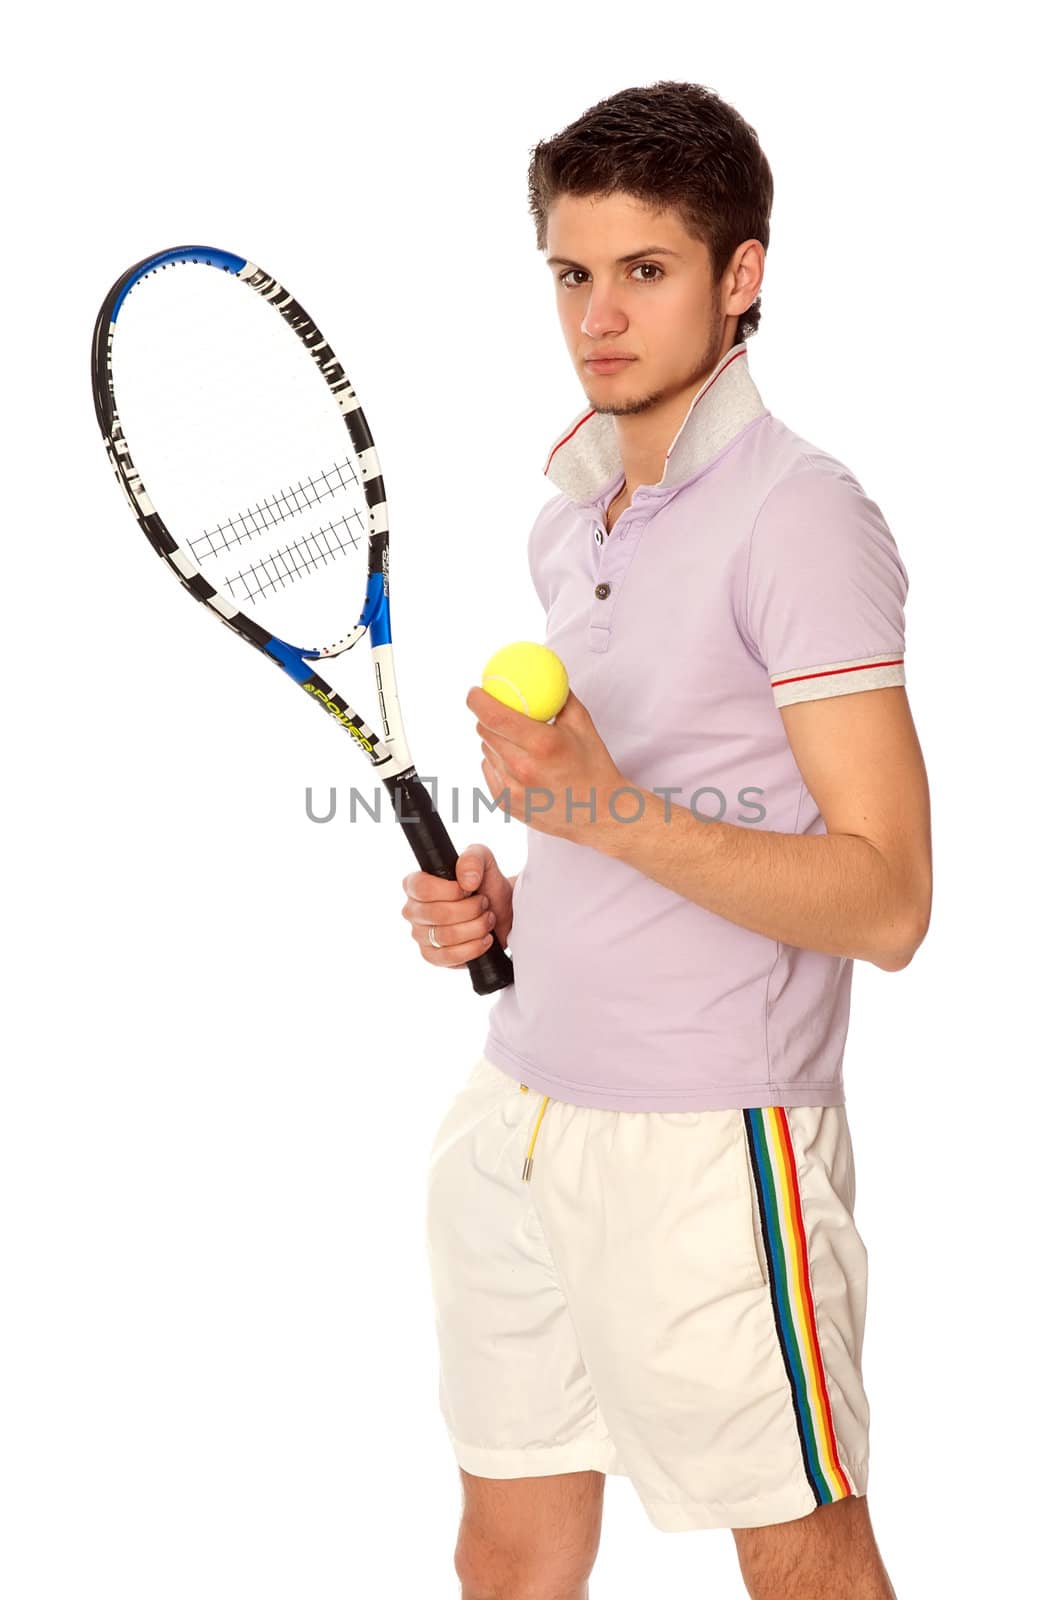 man with racket concentrated on playing tennis and preparing for the ball serving